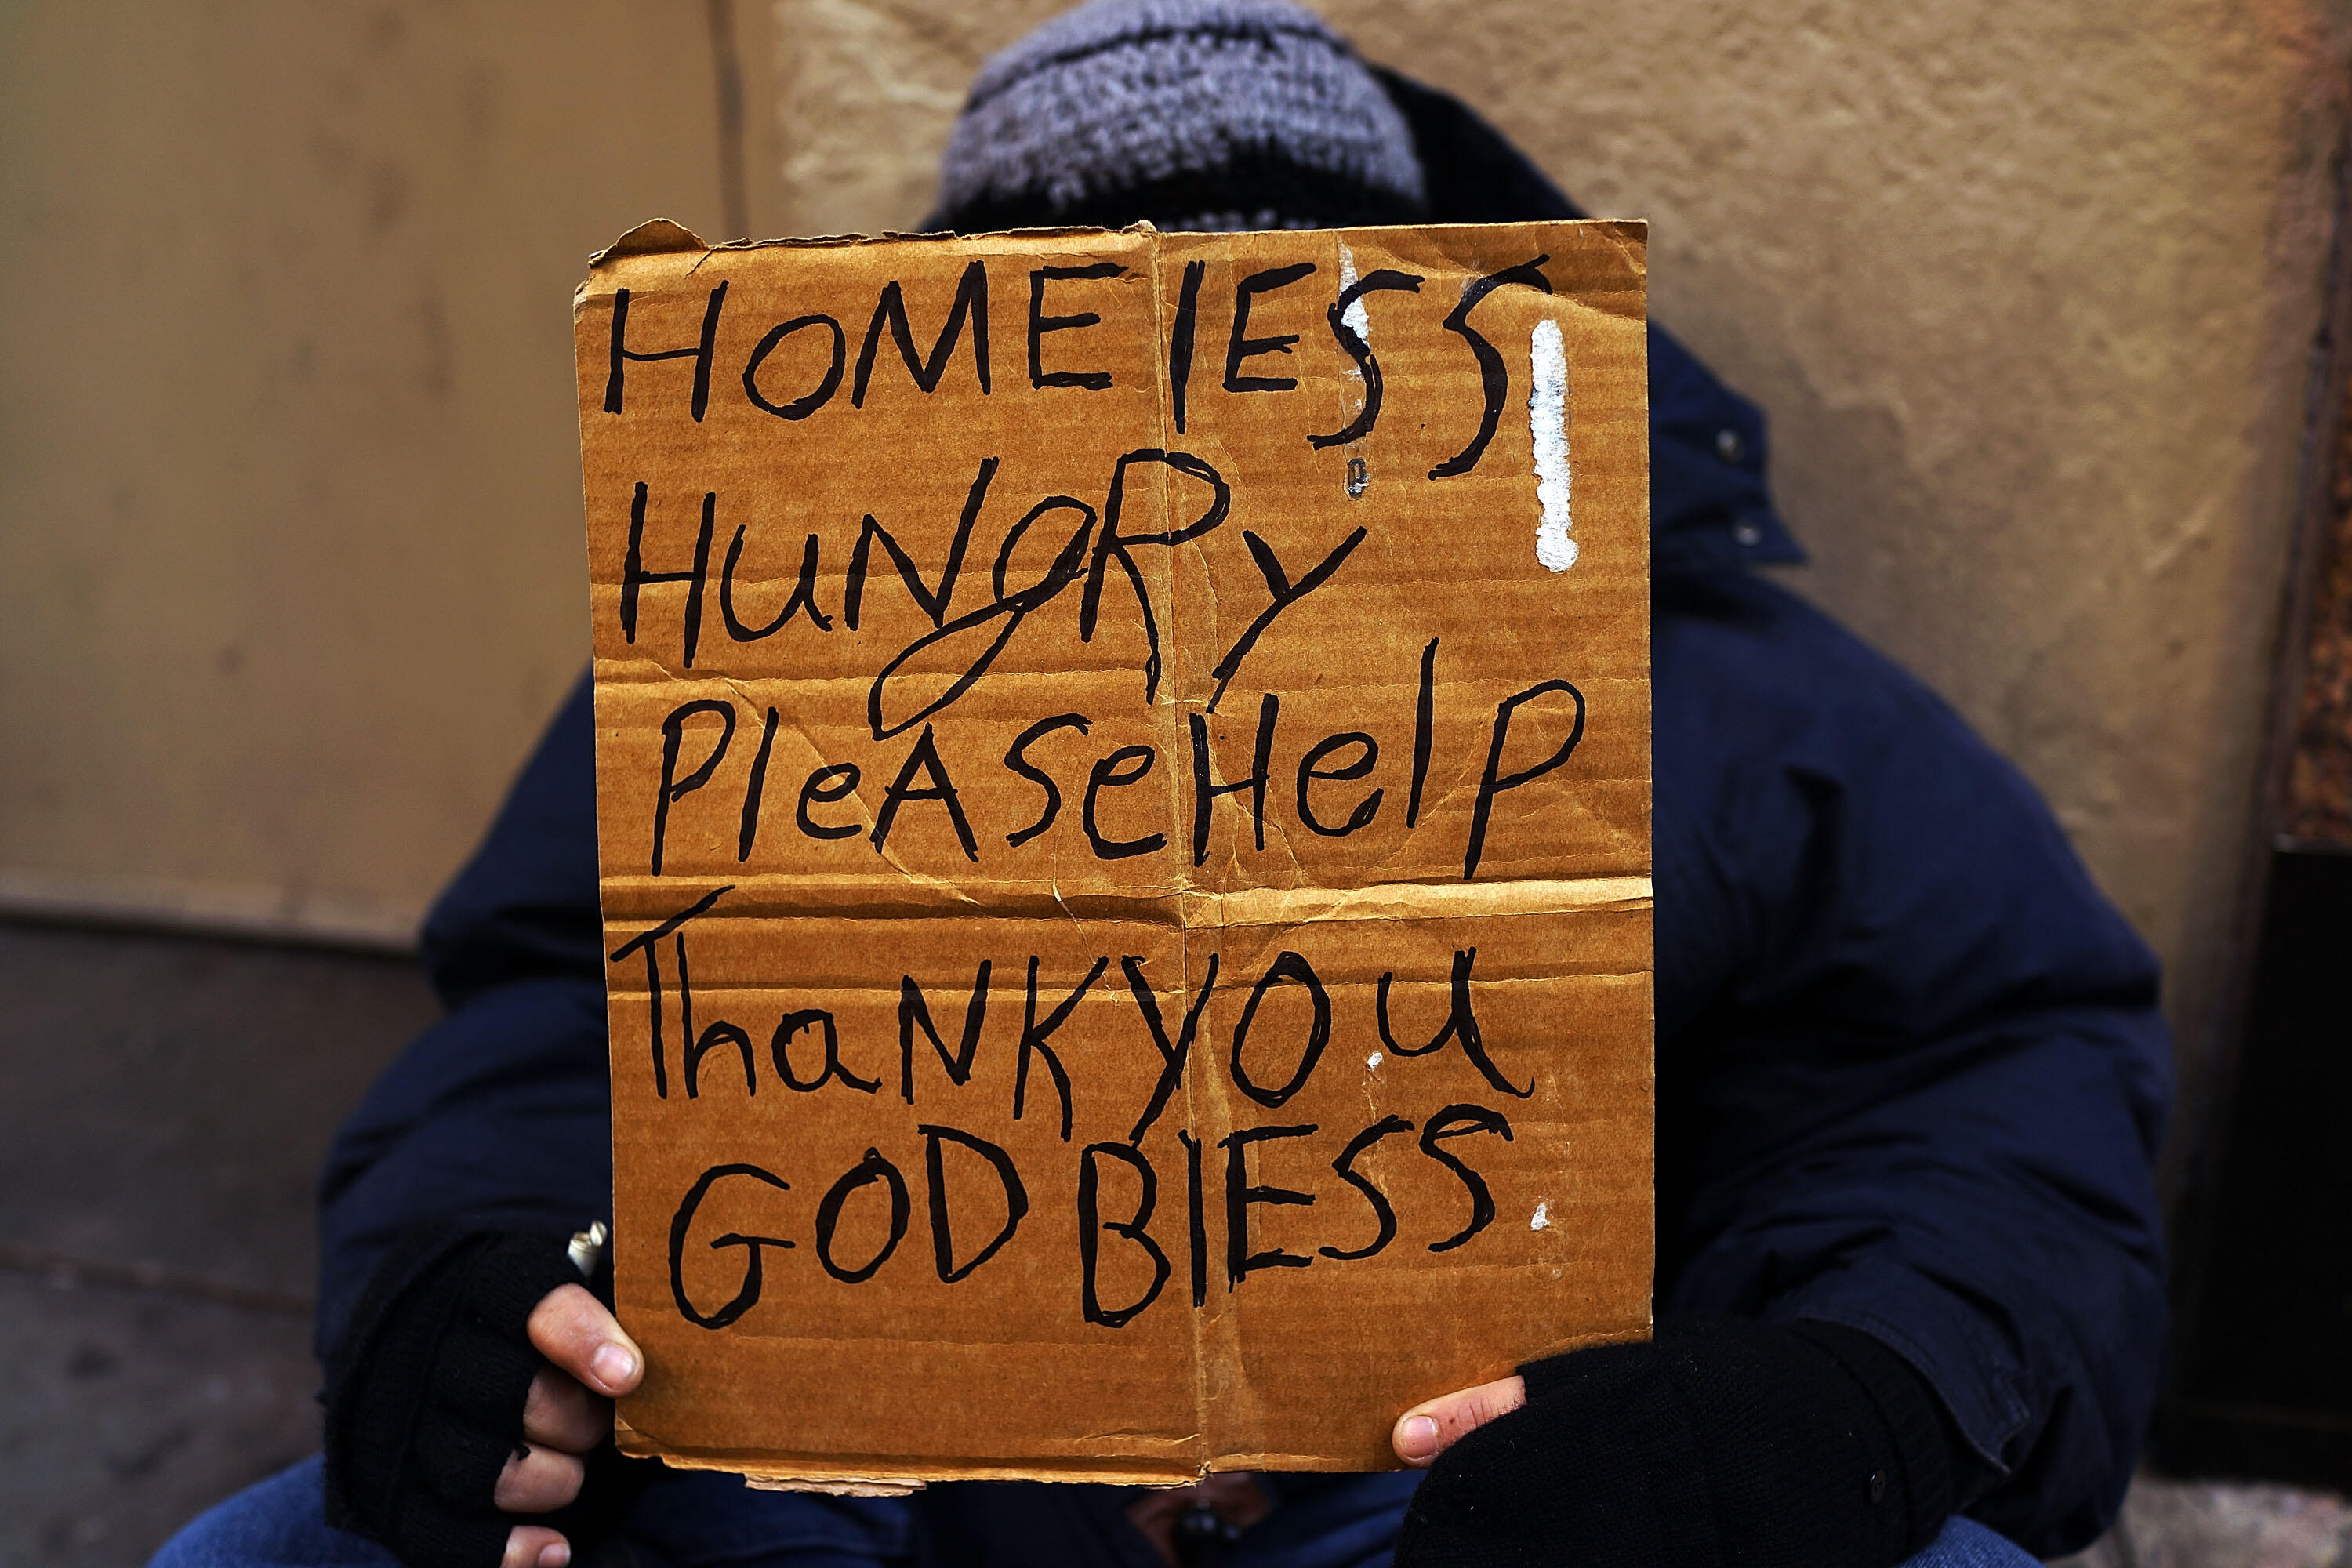 NEW YORK, NY - DECEMBER 04:  A person in economic difficulty holds a homemade sign asking for money along a Manhattan street on December 4, 2013 in New York City.  According to a recent study by the by the United States Department of Housing and Urban Dev